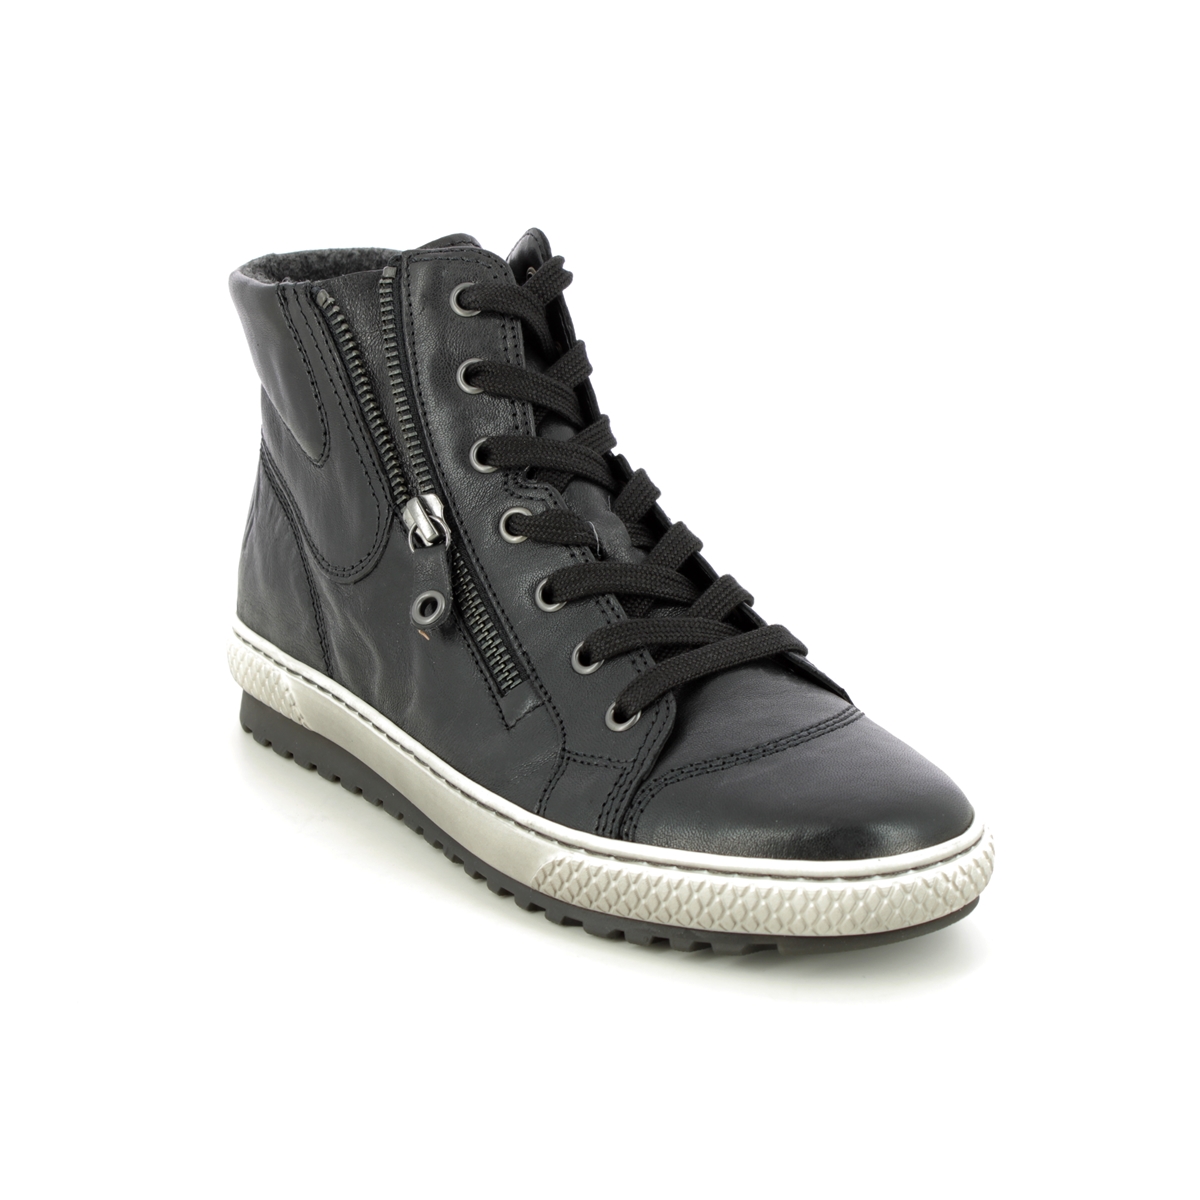 Gabor Bulner Lace Zip Black Leather Womens Hi Tops 93.754.57 In Size 5 In Plain Black Leather  Womens Comfort Lacing Shoes In Soft Black Leather Leath